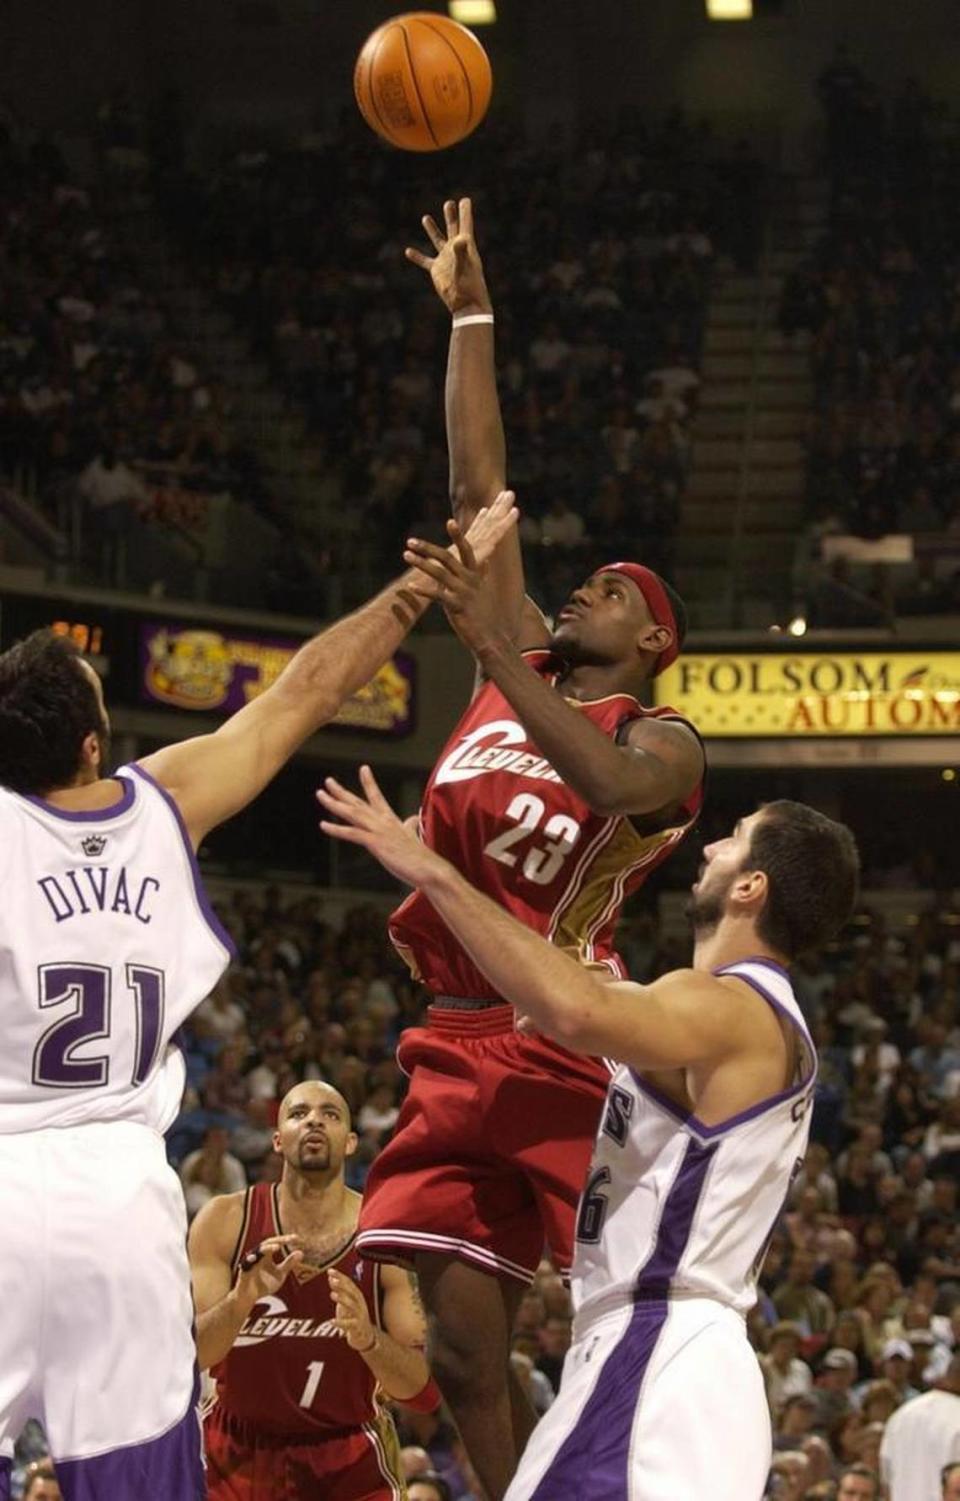 LeBron James of the Cleveland Cavaliers puts up a shot against Vlade Divac of the Sacramento Kings during an NBA basketball game on Oct. 29, 2003 at Arco Arena in Sacramento.